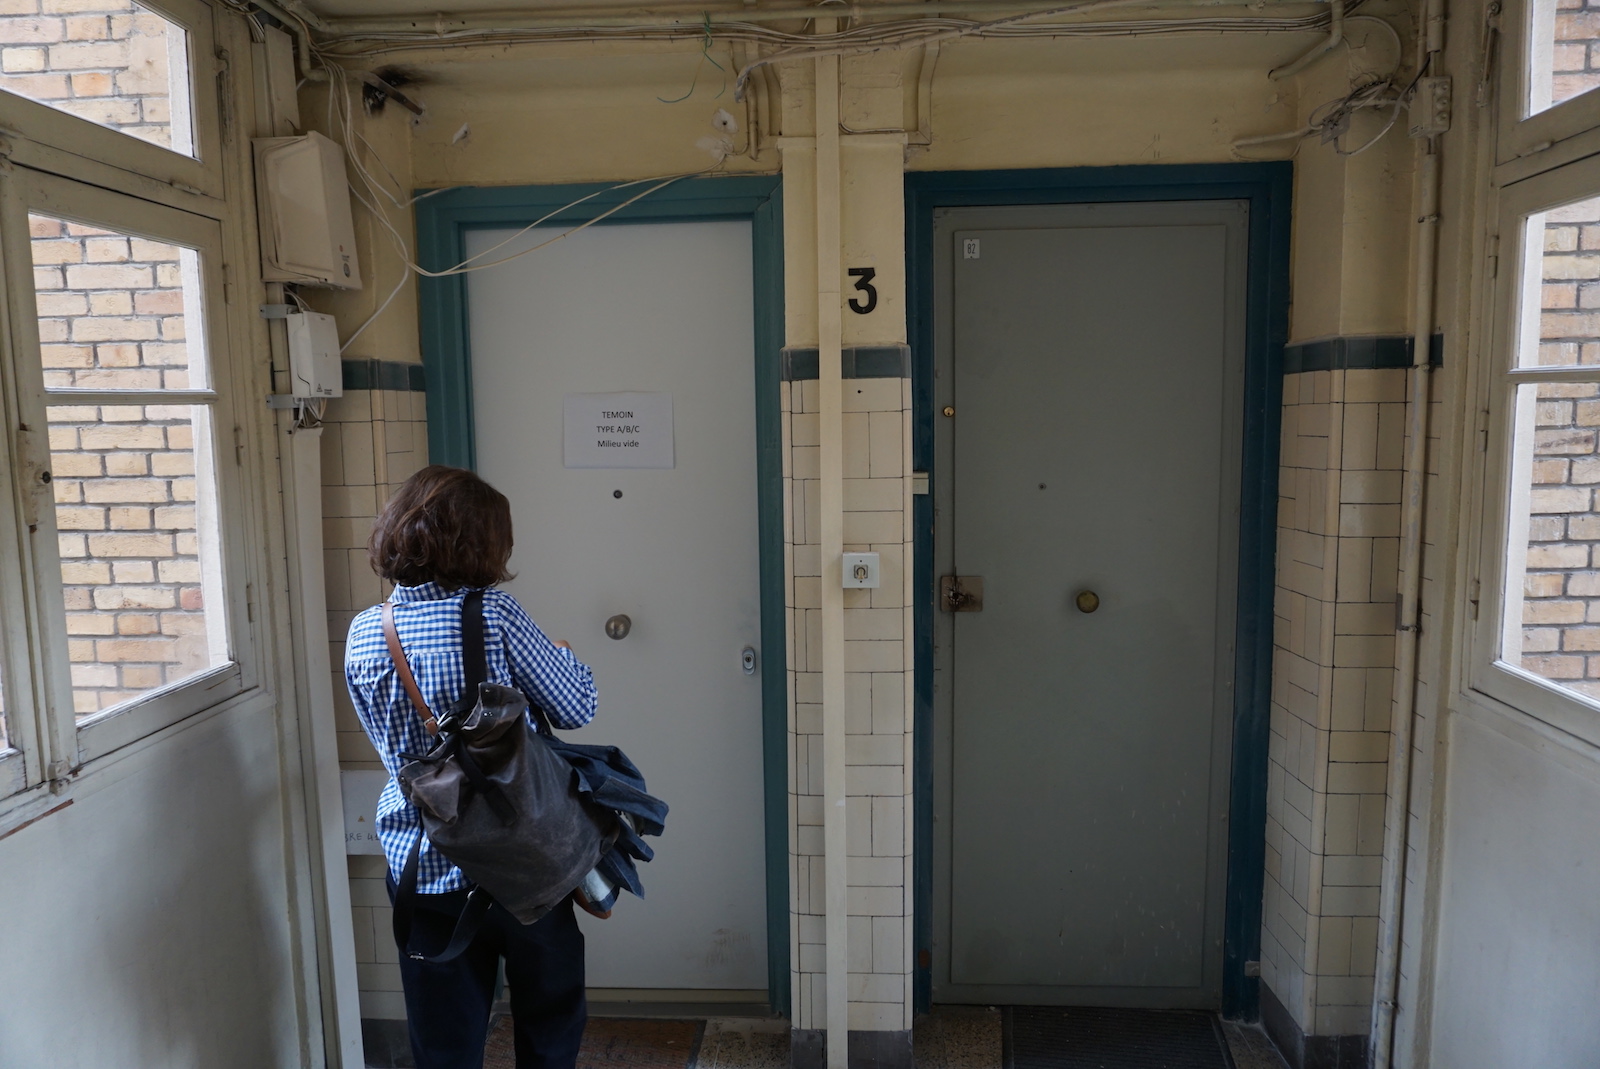 a woman faces two doors with green trim inside a small hallway